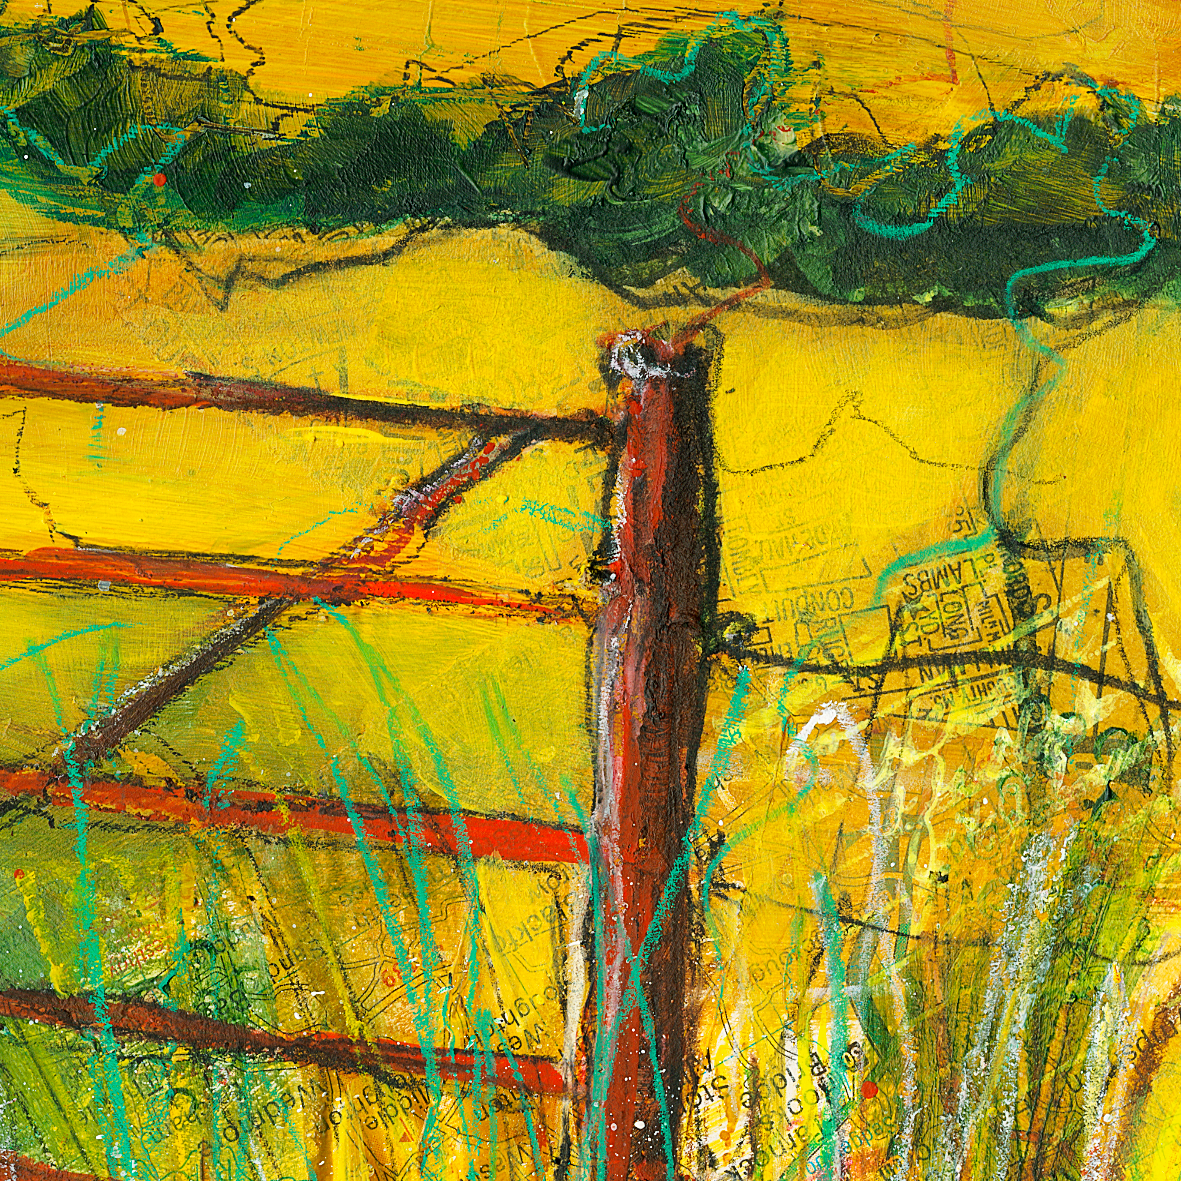 'Gated Field' [Limited Edition Giclée Print]